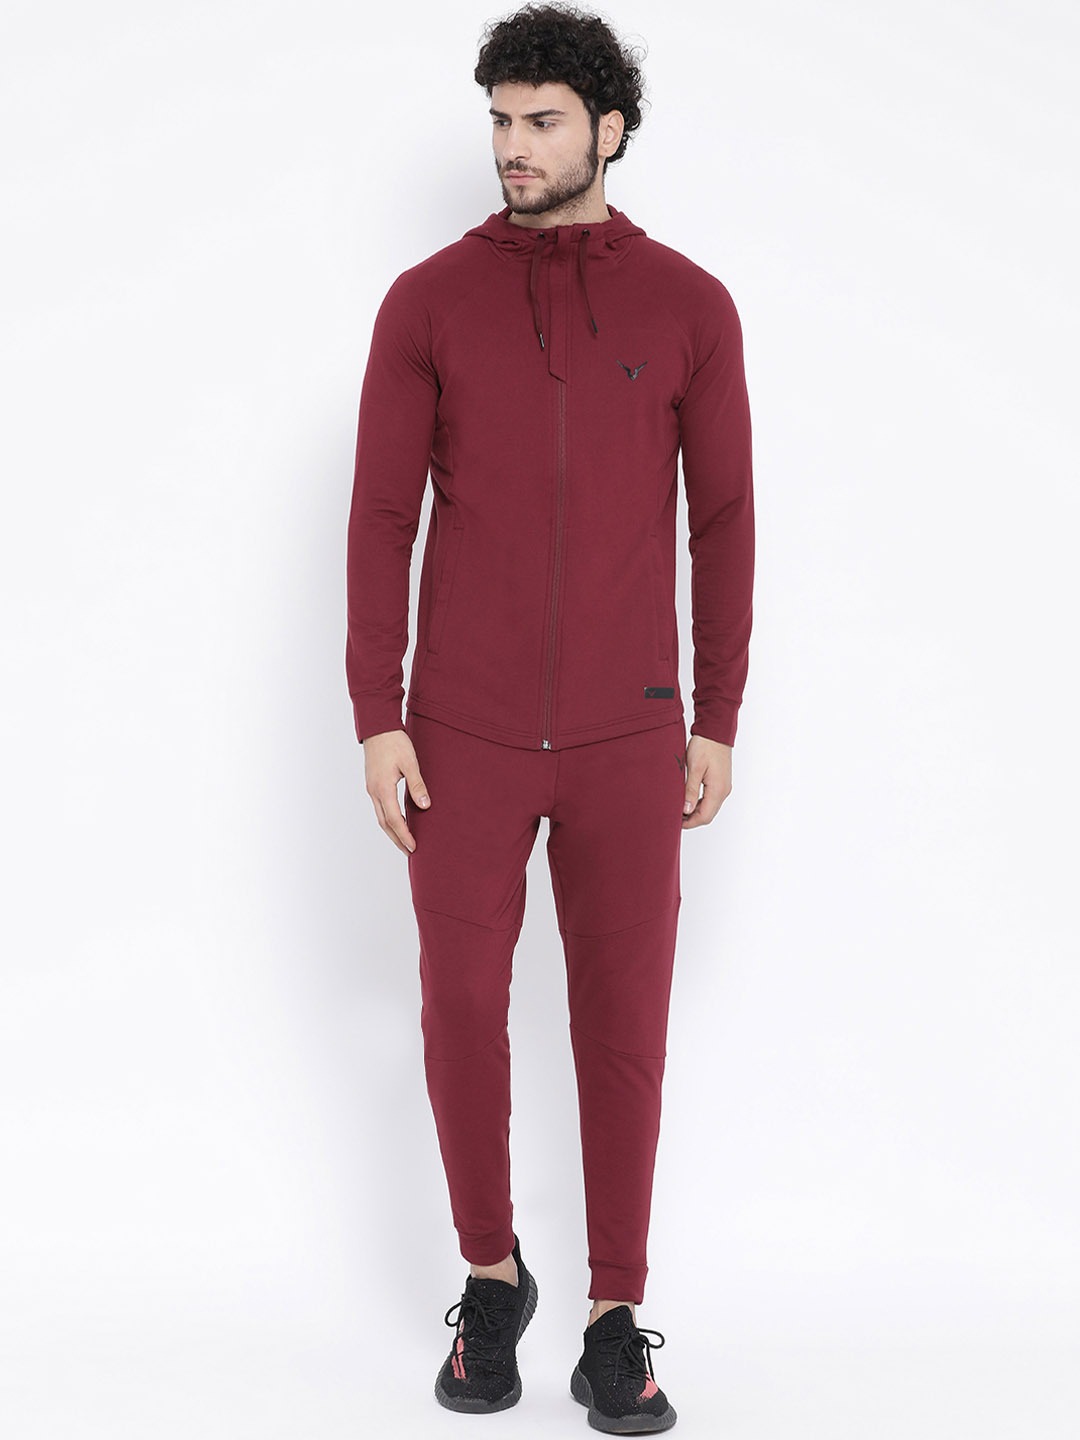 Clothing Tracksuits | Invincible Men Burgundy Solid Slim Fit Tracksuits - XW76713